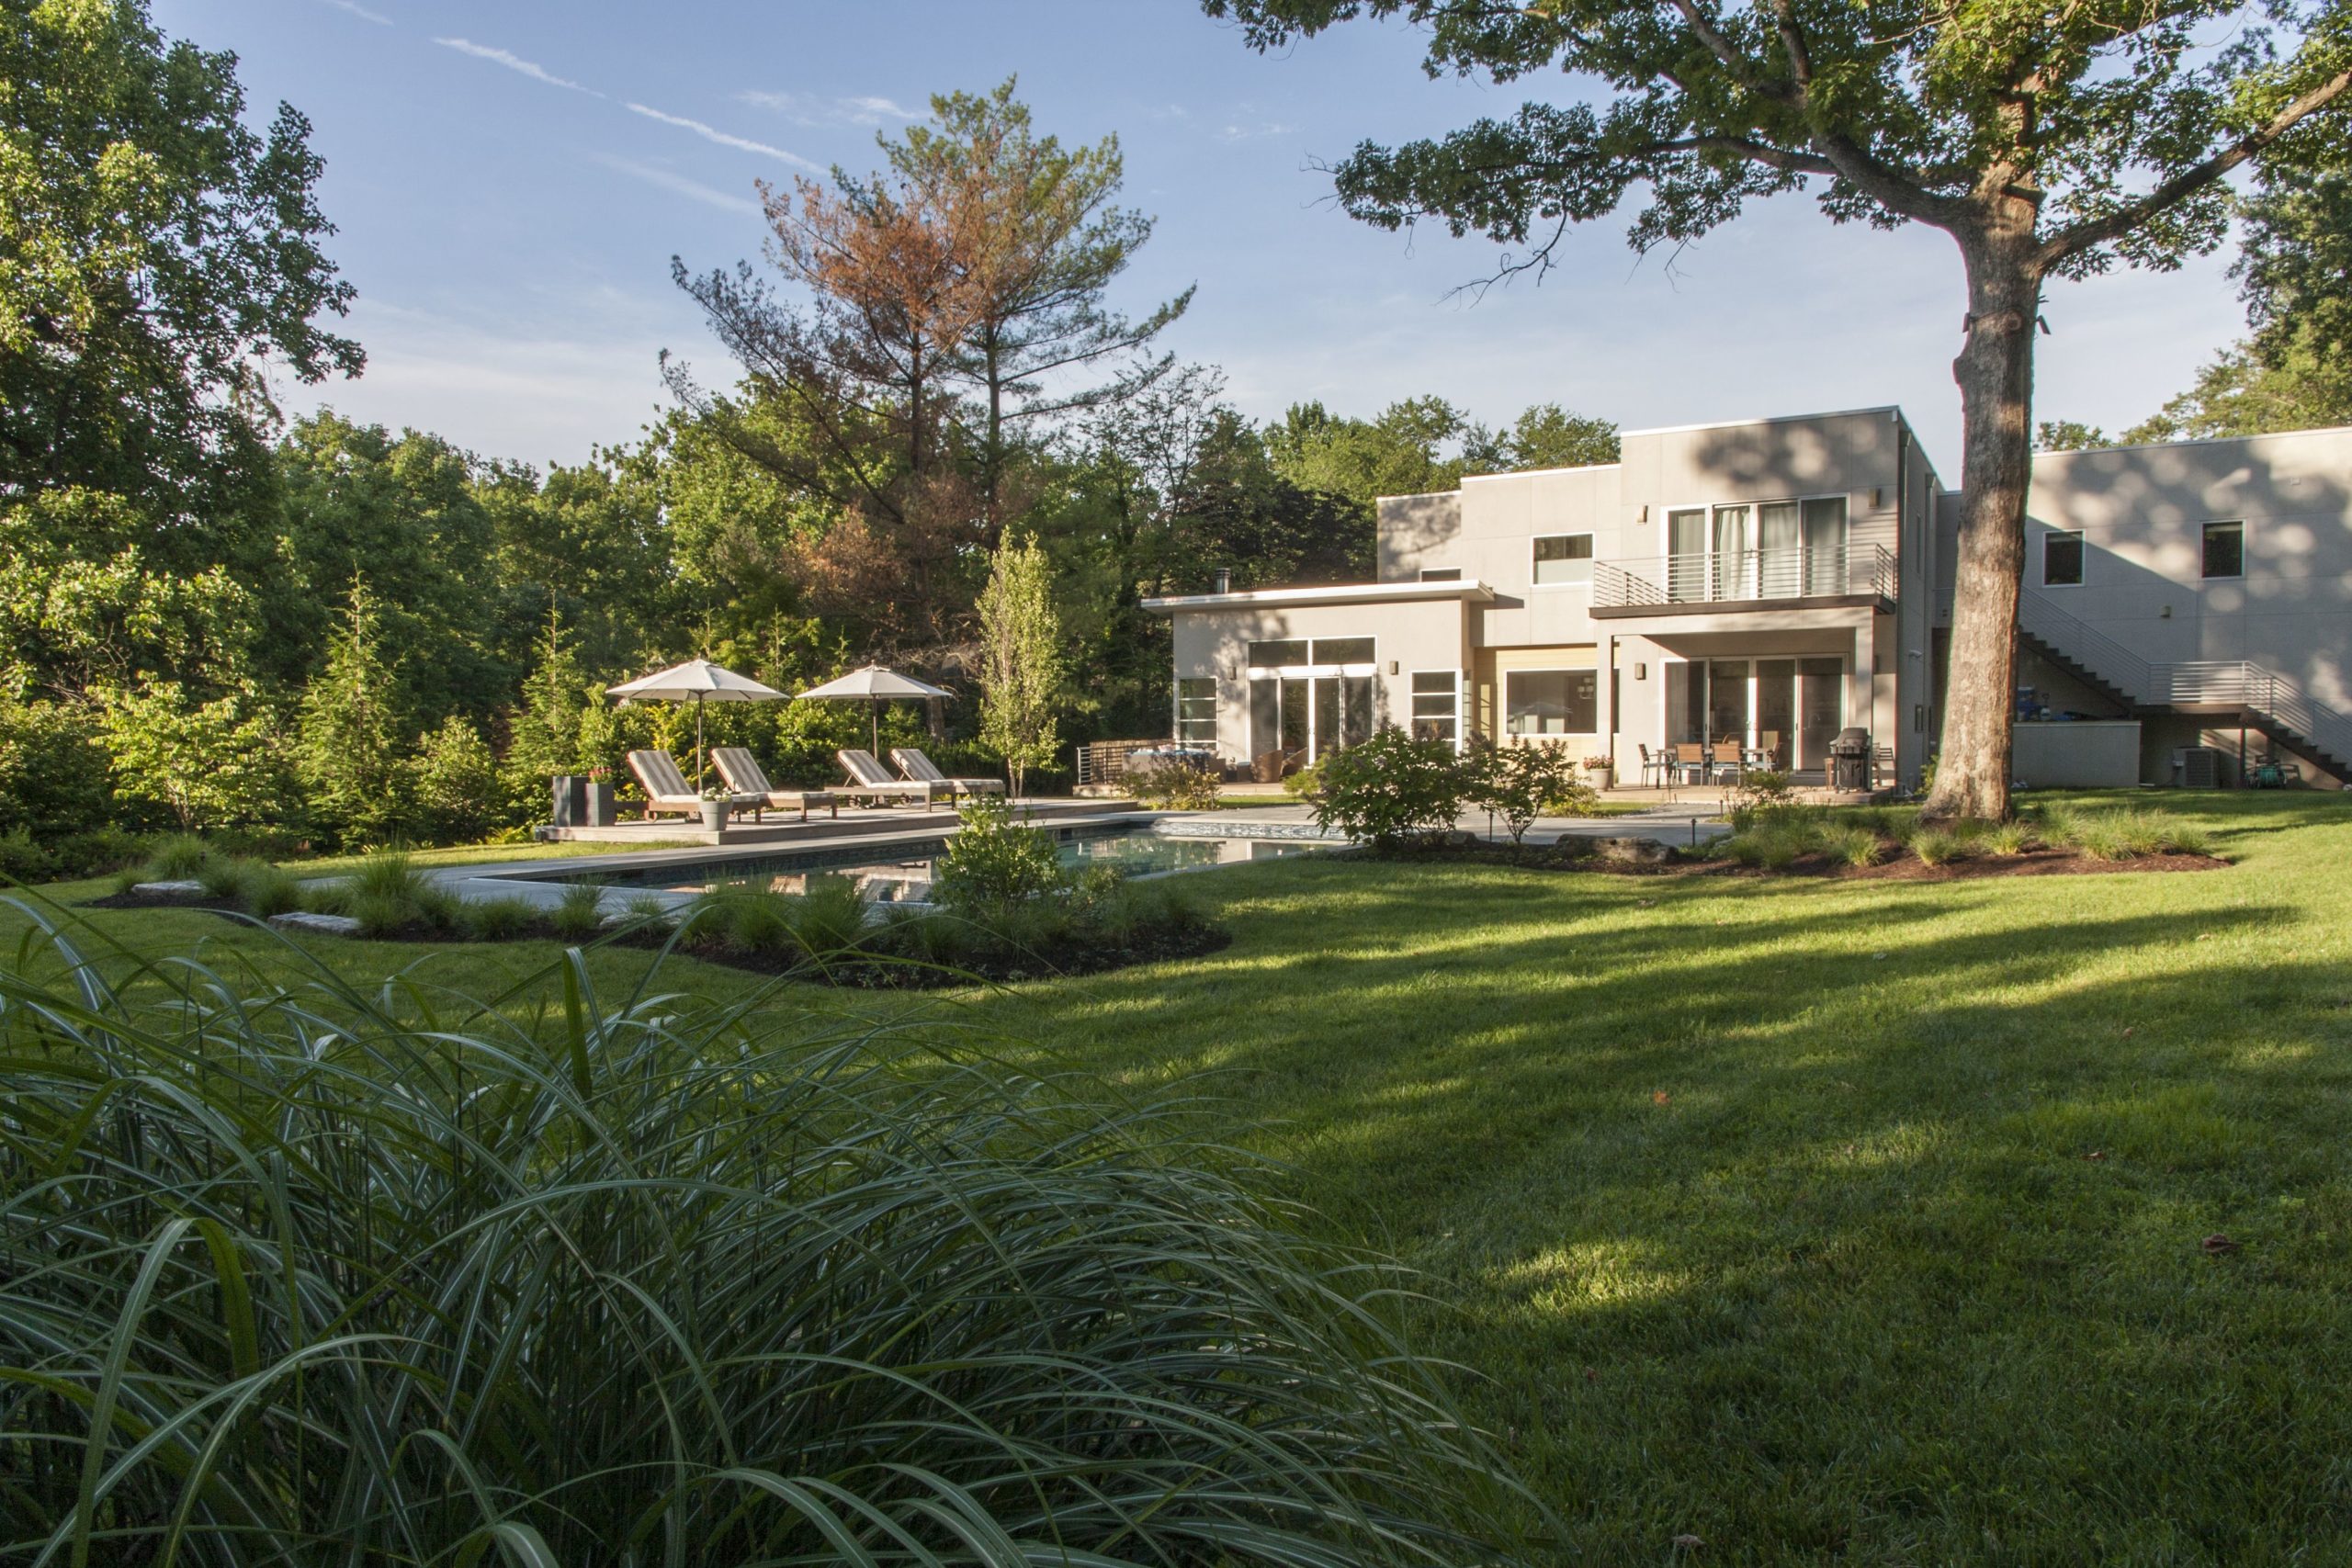 An image of a modern residence featuring a vast lawn, trees, and a recently renovated landscape.